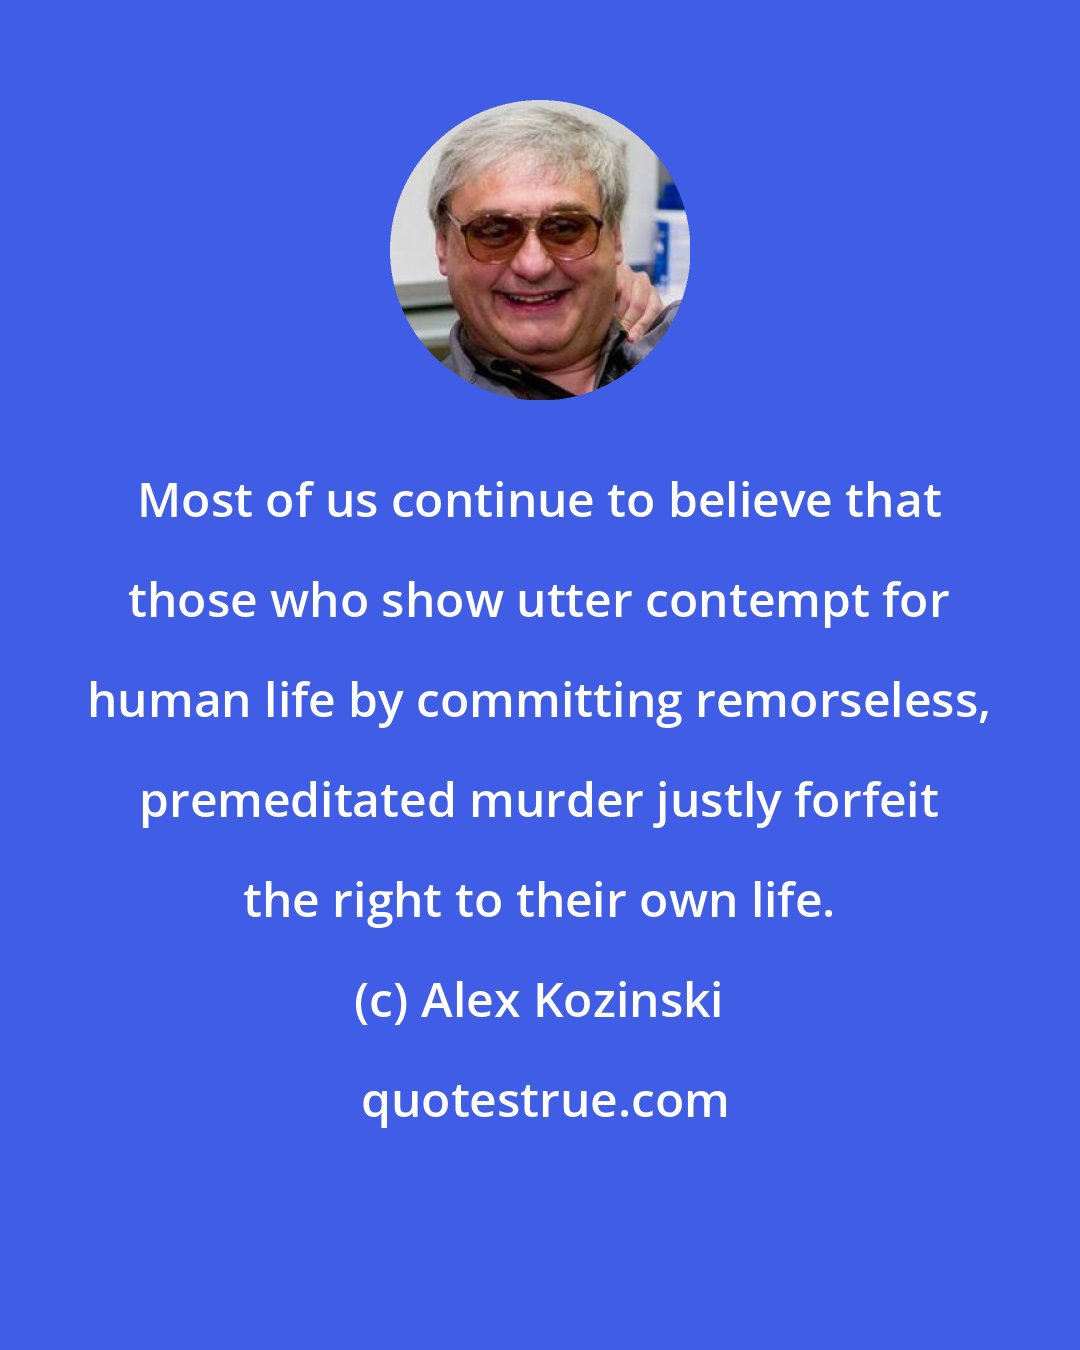 Alex Kozinski: Most of us continue to believe that those who show utter contempt for human life by committing remorseless, premeditated murder justly forfeit the right to their own life.